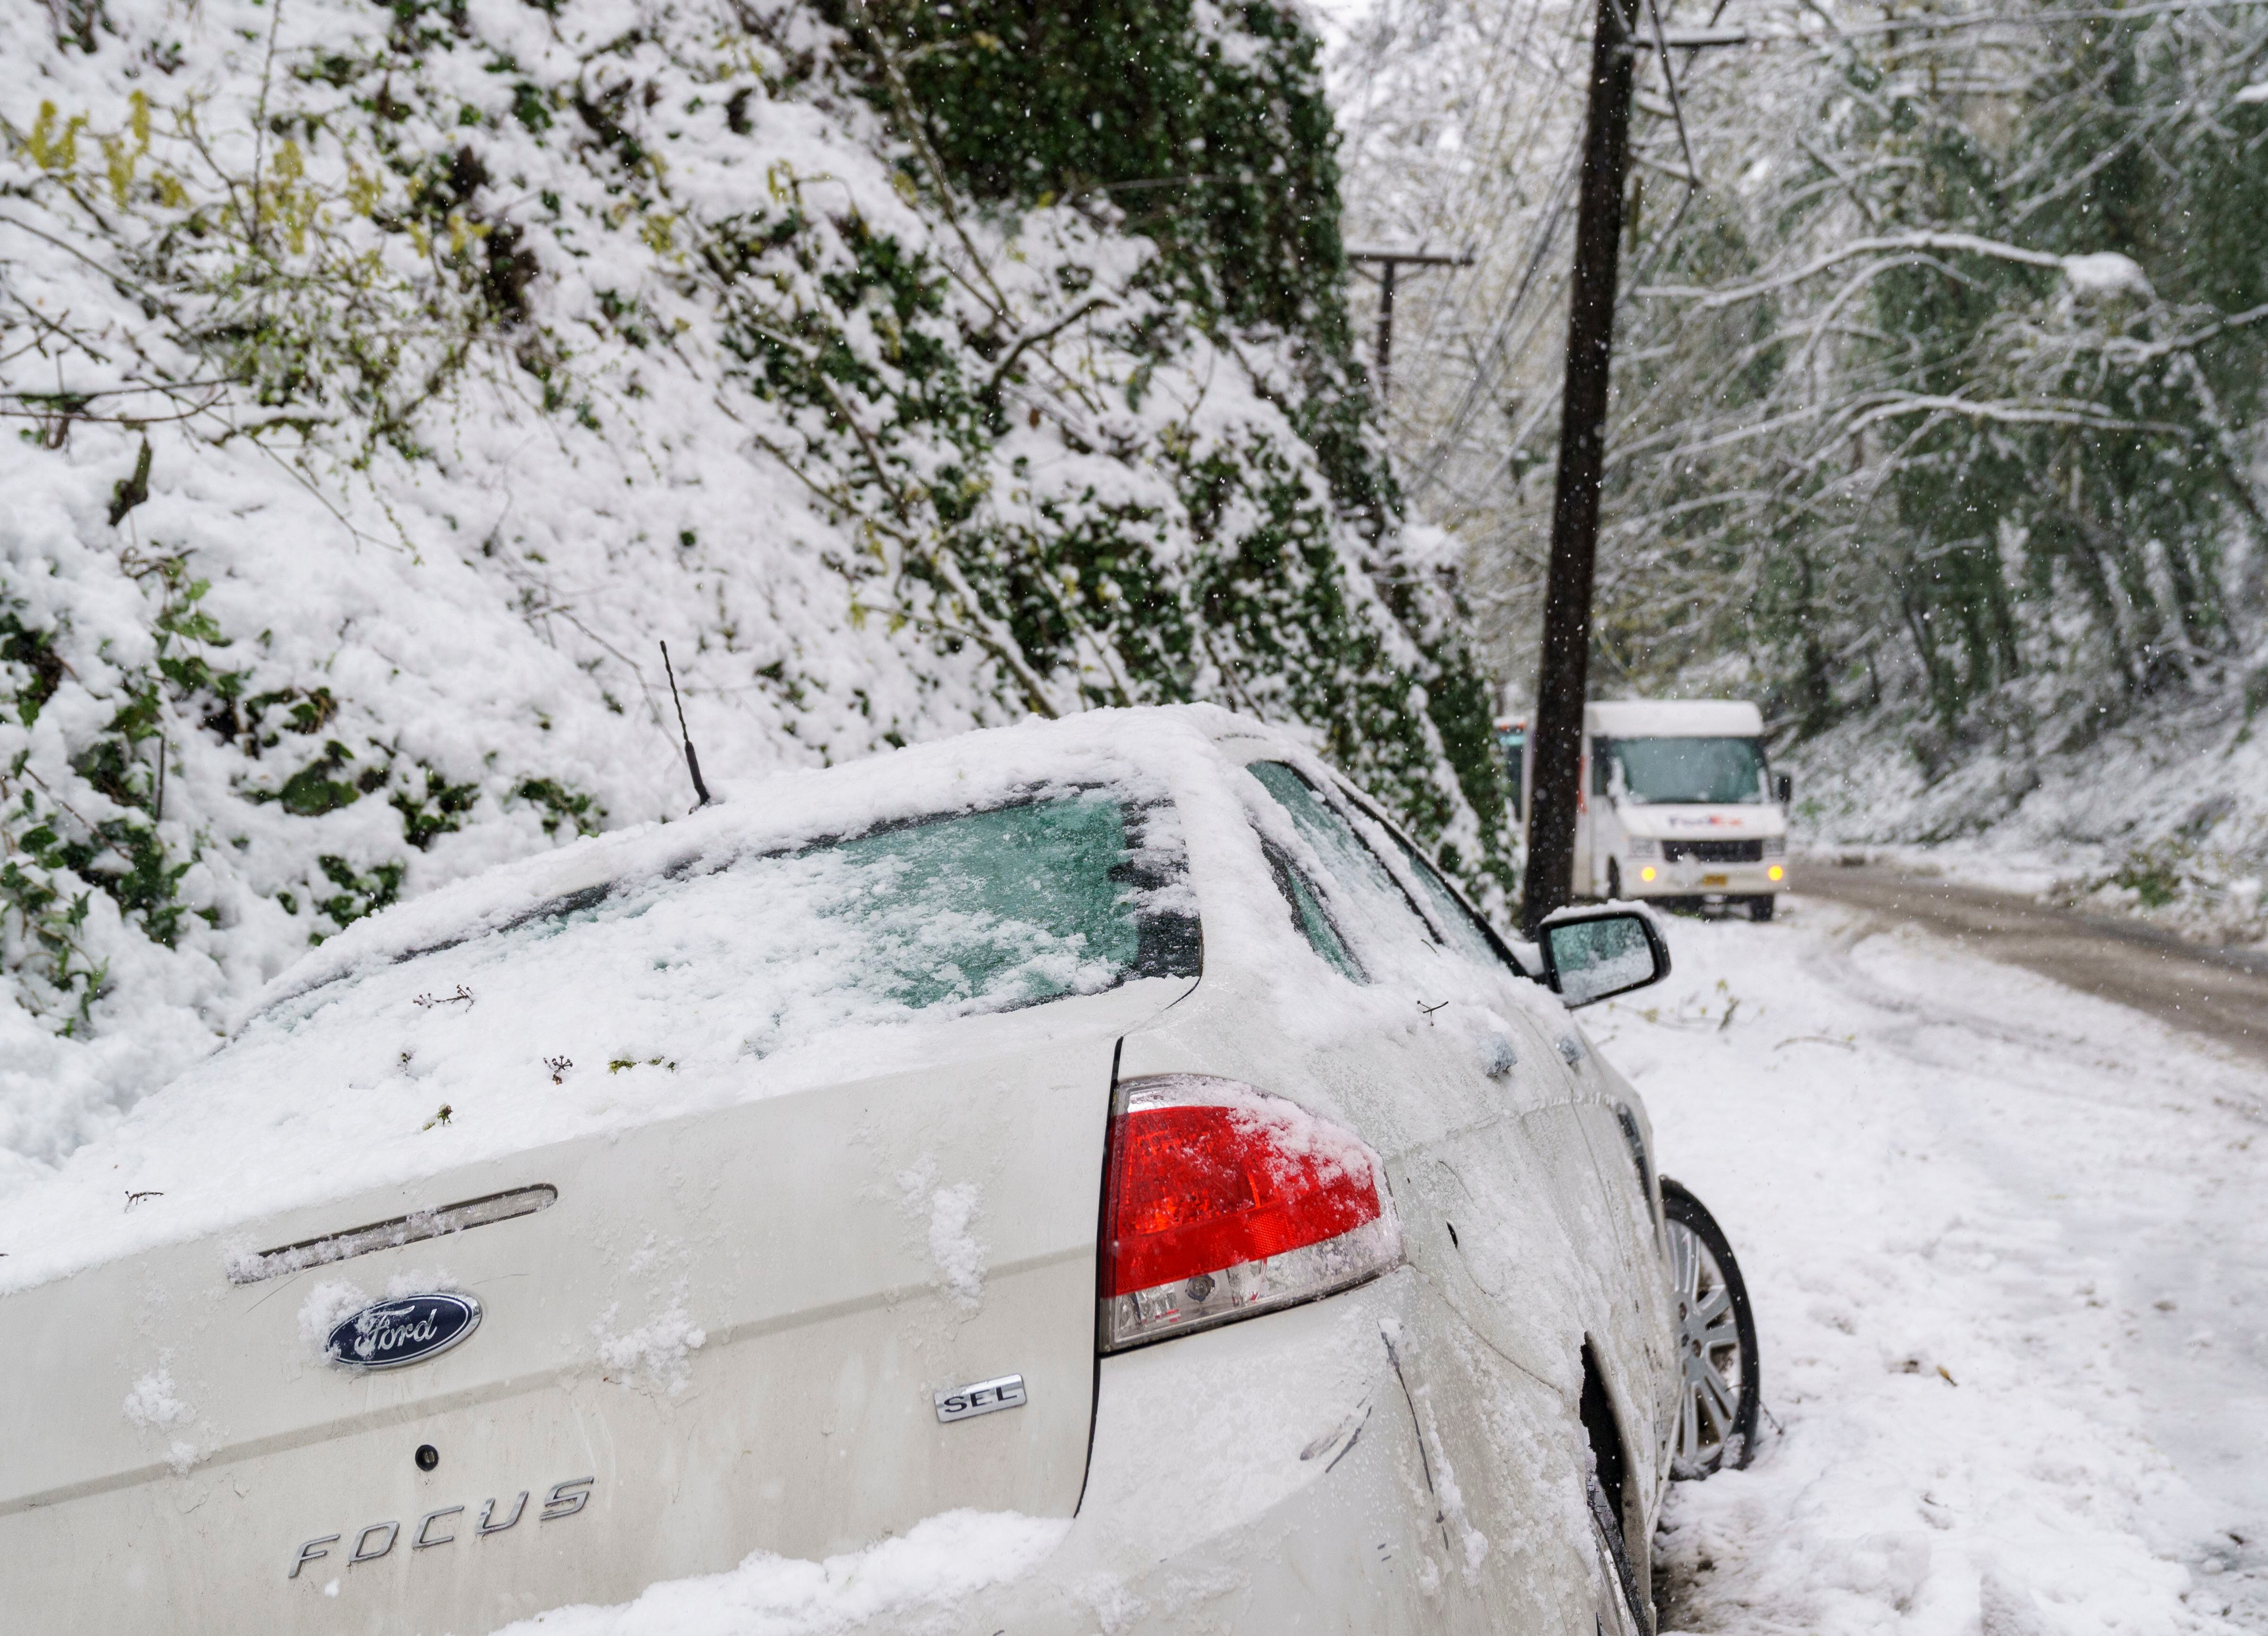 An abandoned vehicle sits in a ditch in this April 11, 2022, file photo from West Burnside Road in Portland. Drivers should be prepared this week for dangerous road conditions as forecasters say the weather is expected to be extremely cold on Thursday and Friday with a likelihood of snow or freezing rain.